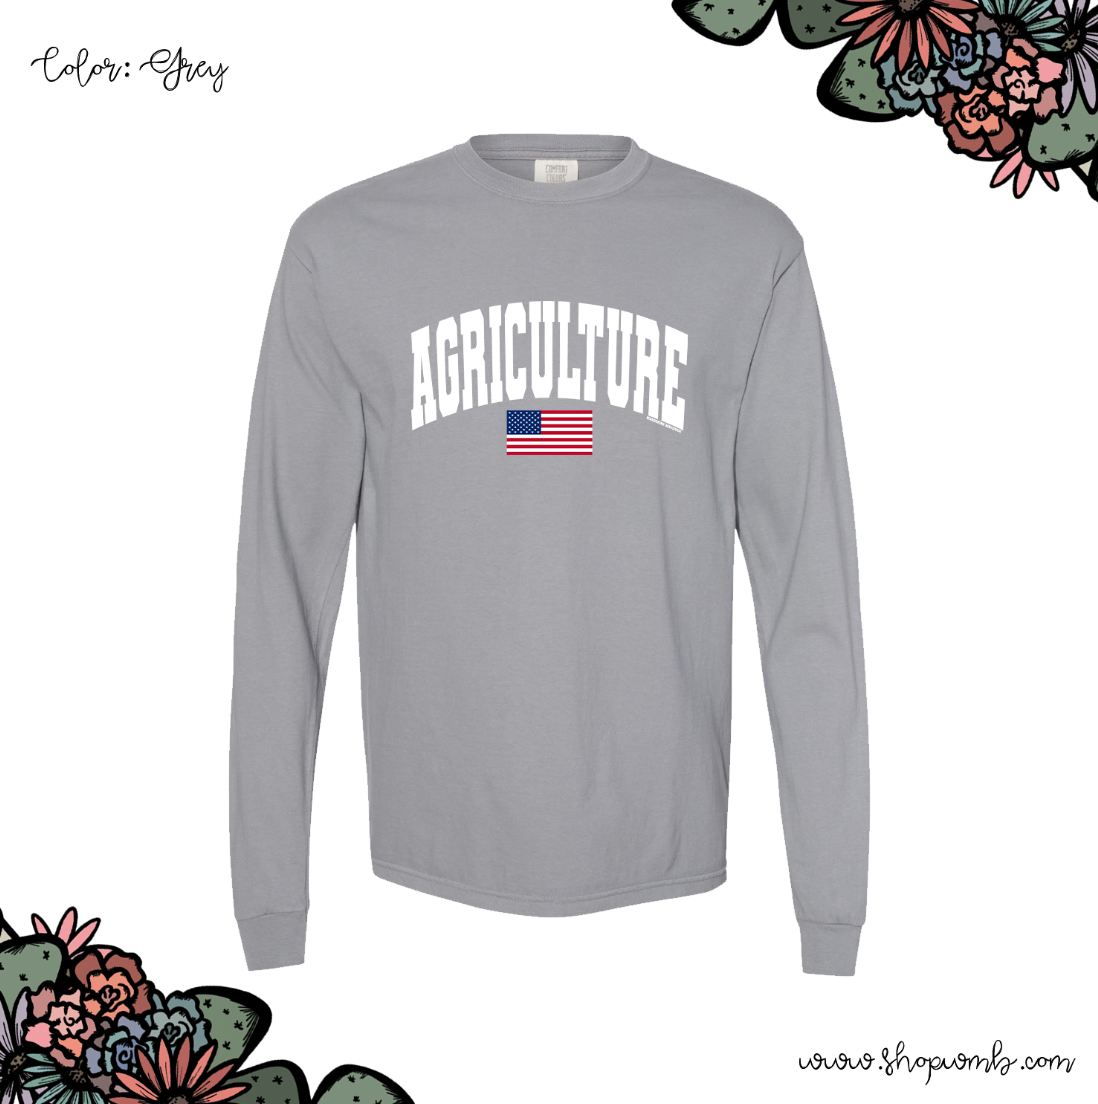 Agriculture Flag LONG SLEEVE T-Shirt (S-3XL) - Multiple Colors!